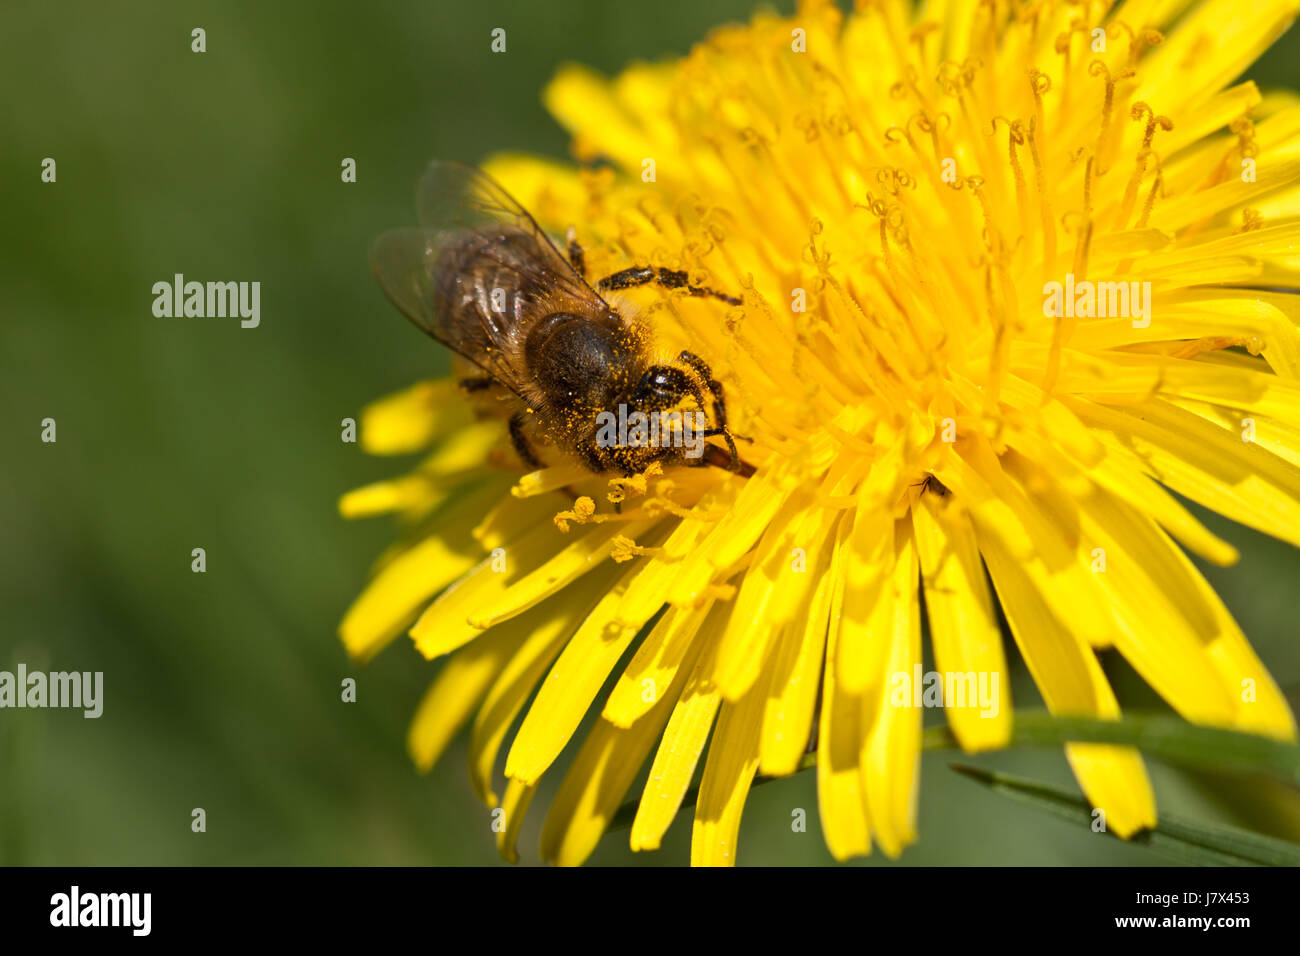 macro close-up macro admission close up view insect insects honeybee dandelion Stock Photo